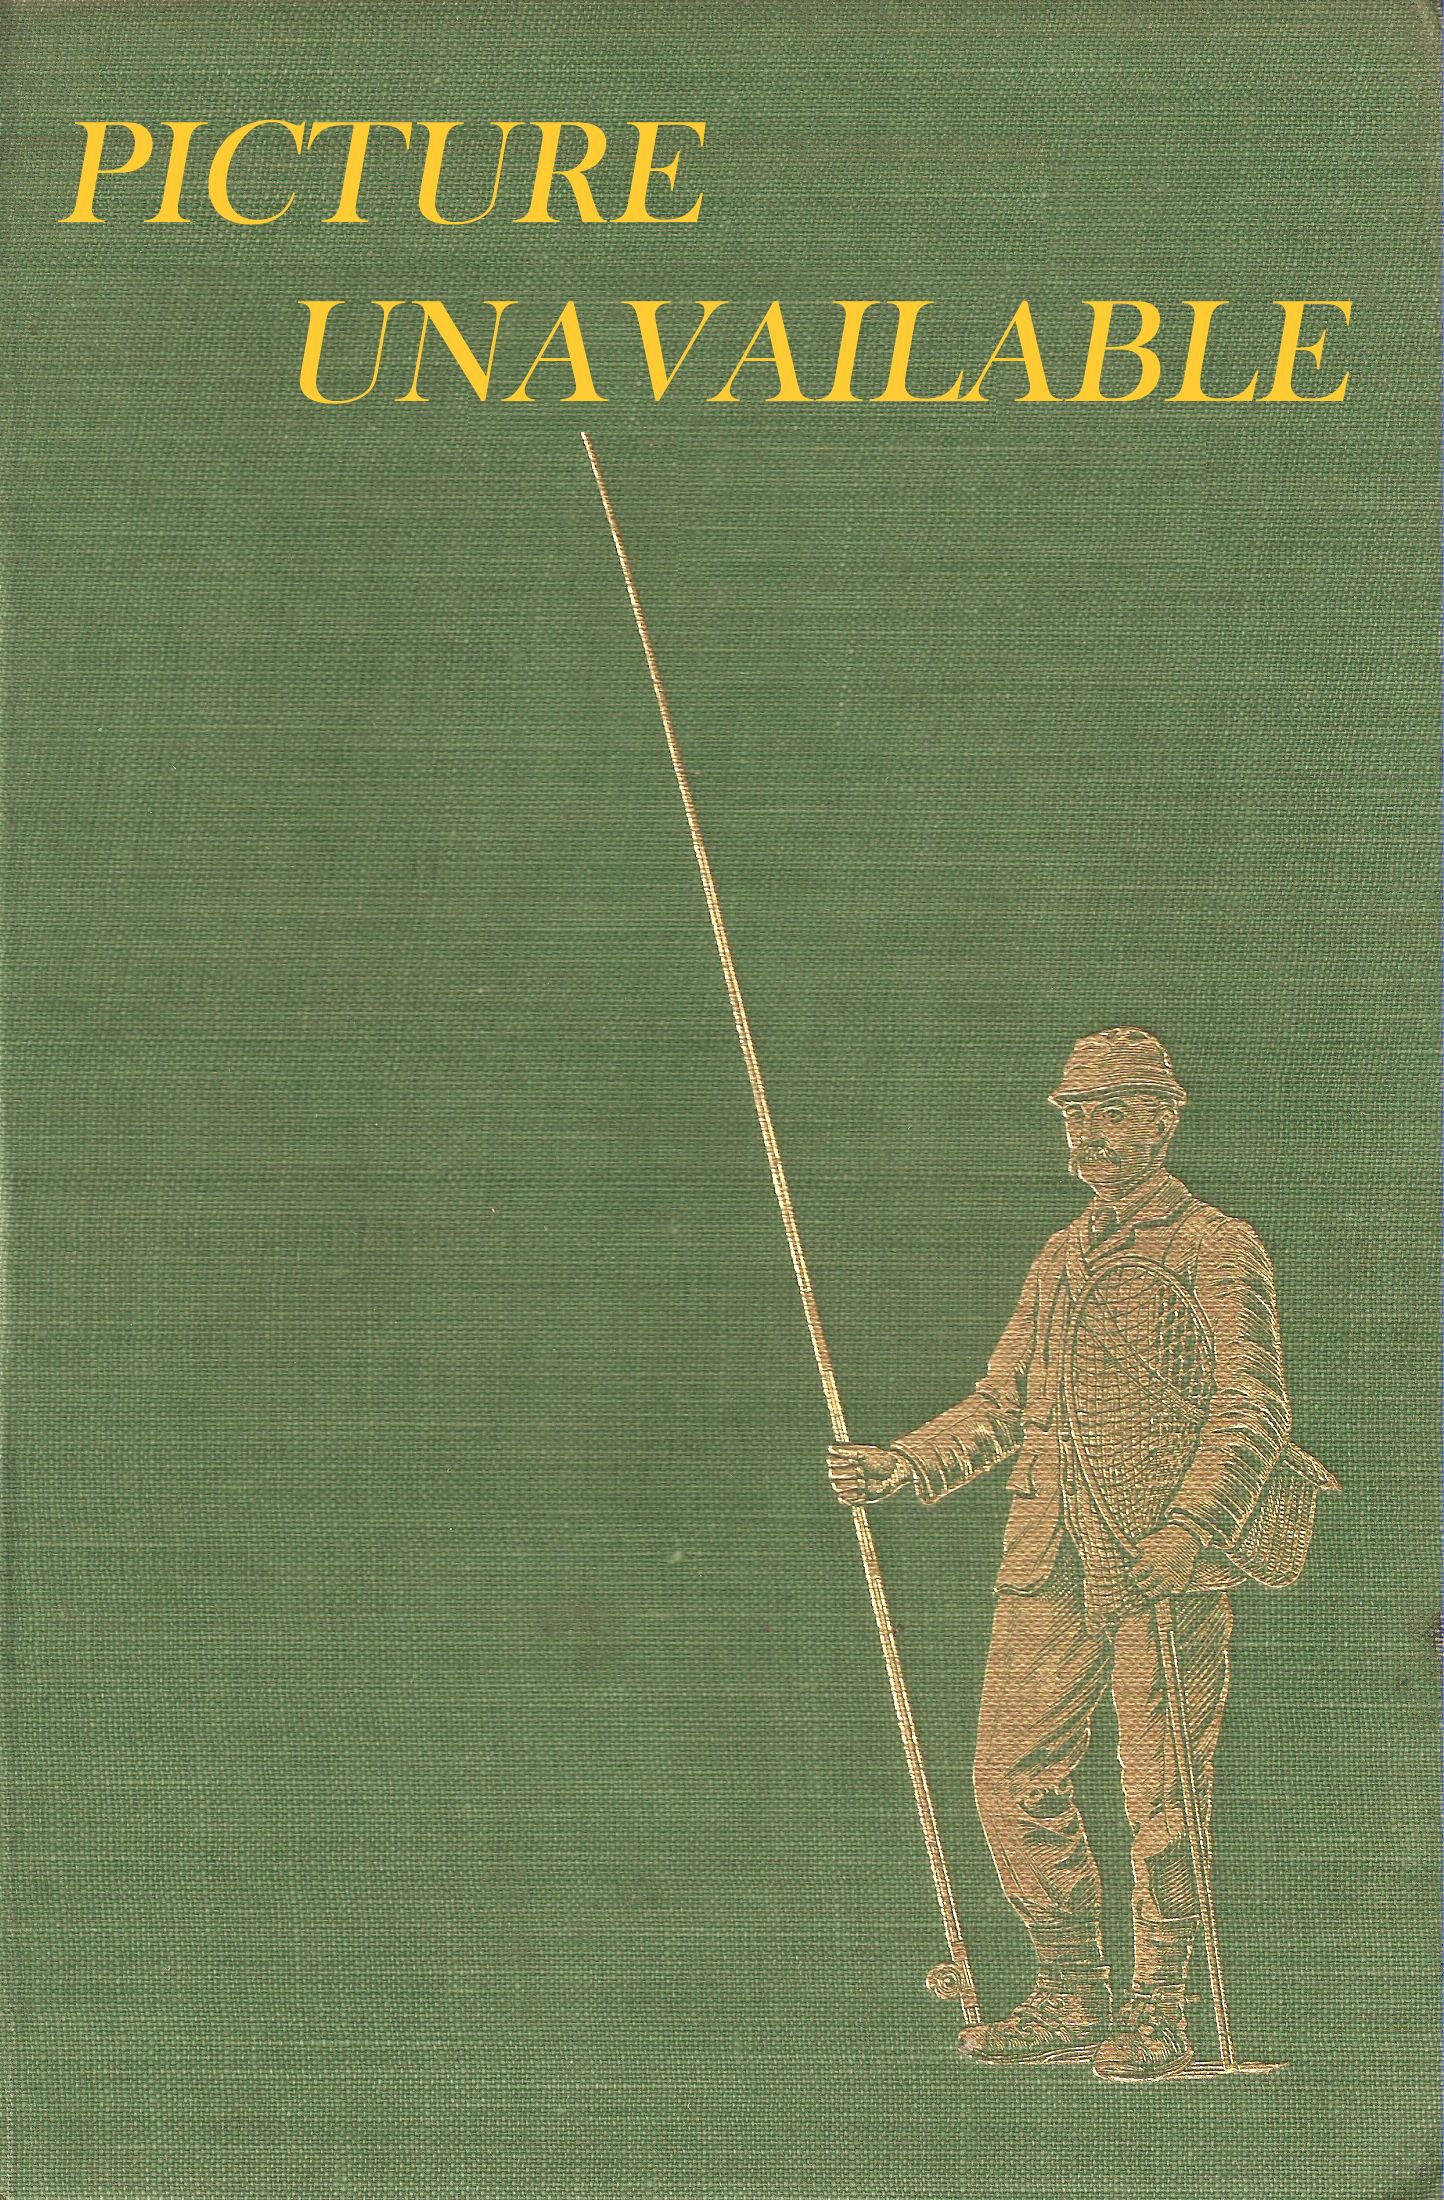 THE ART OF THE COMPLEAT ANGLER. By John R. Cooper.